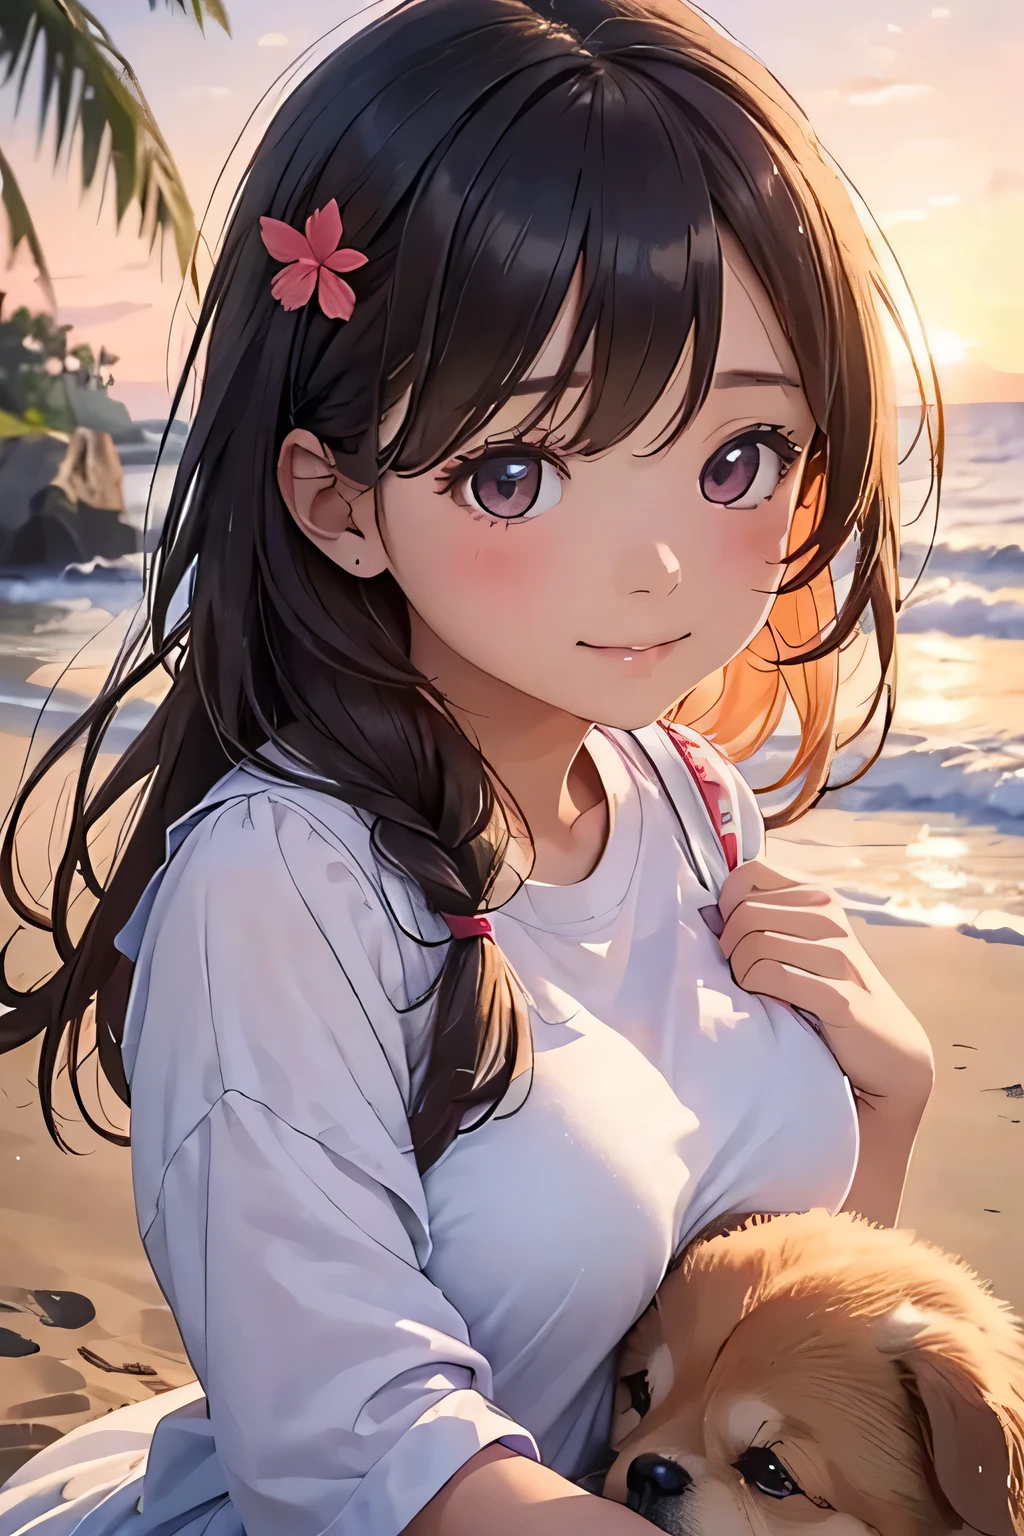 highest quality、High resolution、Detailed Background、(Detailed eyes:1.2)、Teenage beauty、(Highly detailed face:1.4)、(Huge breasts:1.1)、Cute hair color、Cute hairstyle、
At dusk、A young girl is seen taking a walk with her dog, who plays on the beach.。Looking up at the red sky、The sight of her happily running around with her dog、It truly represents the comfort of summer.。
These、A girl enjoying summer in nature、Innocent and adorable、It makes me feel the coming of summer.。An innocent smile、Full of concentration、Relaxed Rest、And fun times with dogs。Truly a summer experience、A lovely view unfolds。